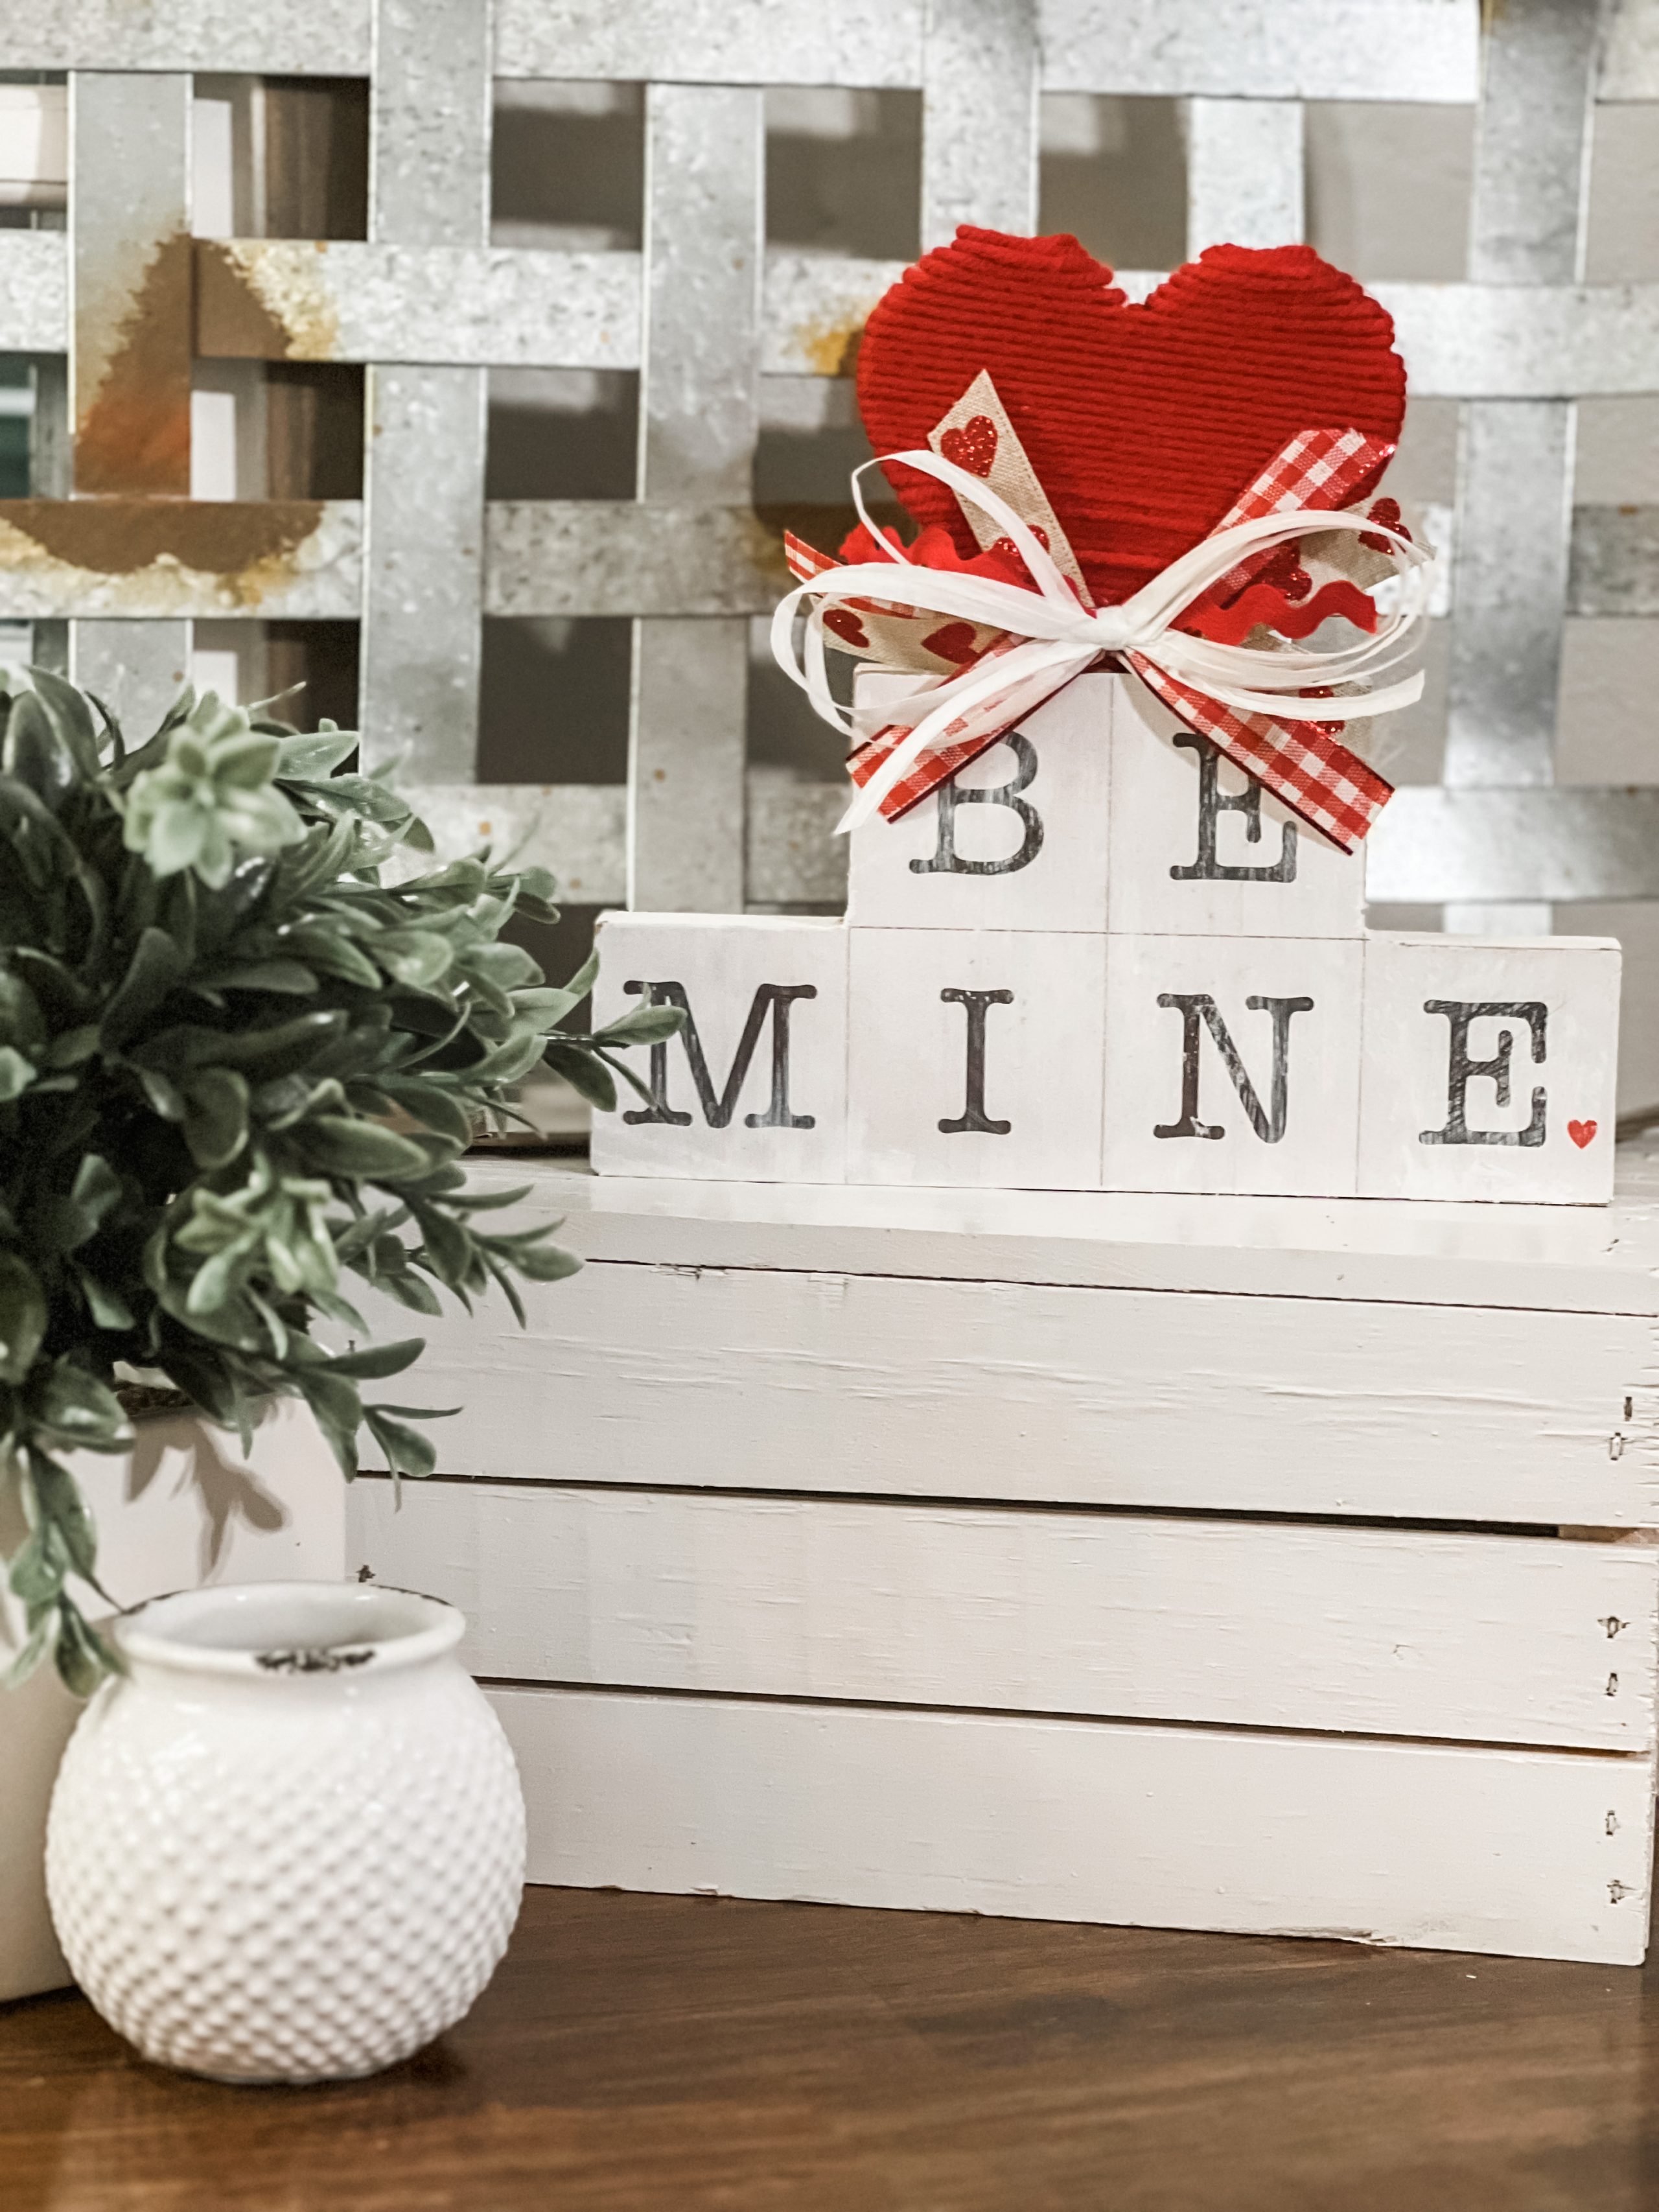 DIY rustic heart for Valentine's décor: Dollar Tree makeover